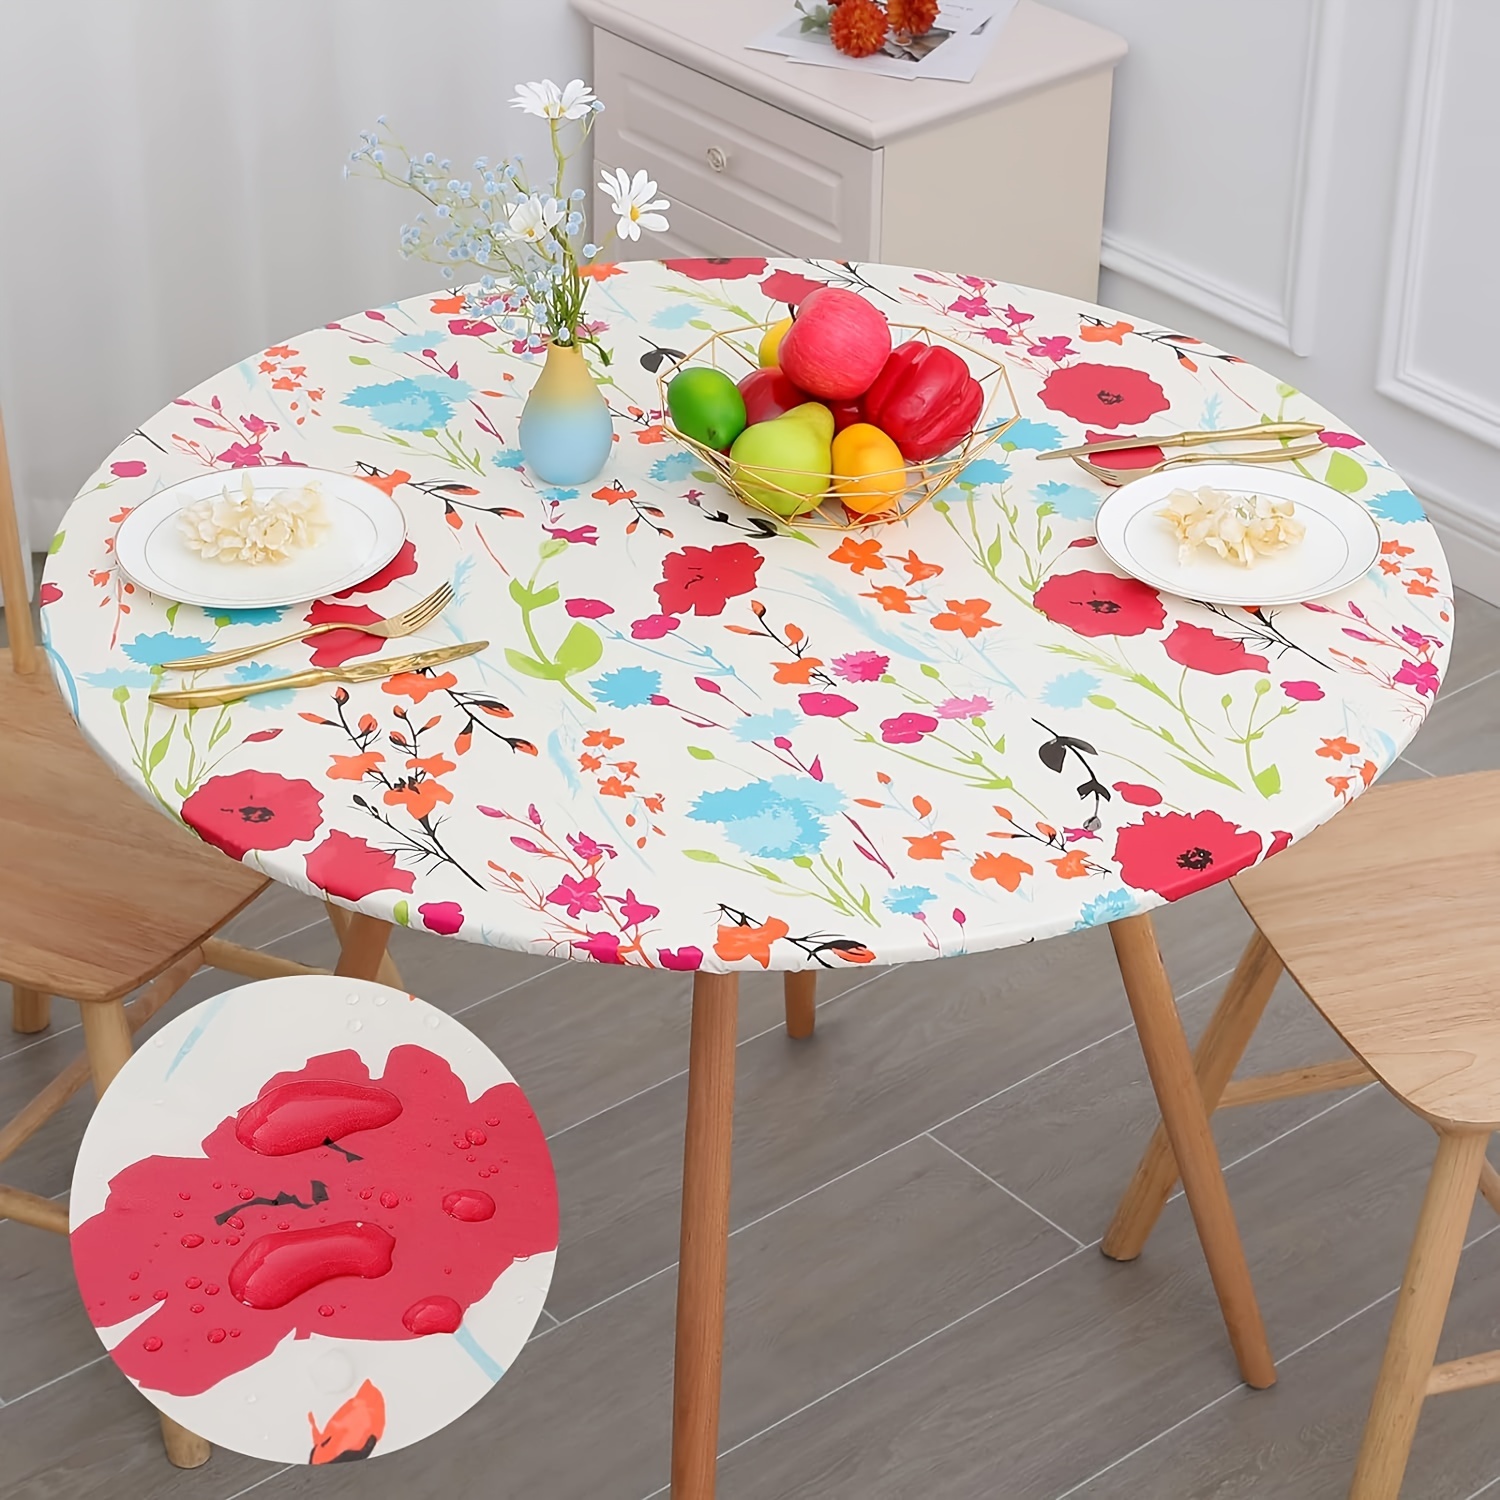 

1pc, Table Cover, Round Floral Print Vinyl Fitted Tablecloth With Elastic Edge, Waterproof & Oil-resistant Plastic Table Cover, Vinyl Flannel Backed Tablecloth For Dining, Outdoor, Picnic